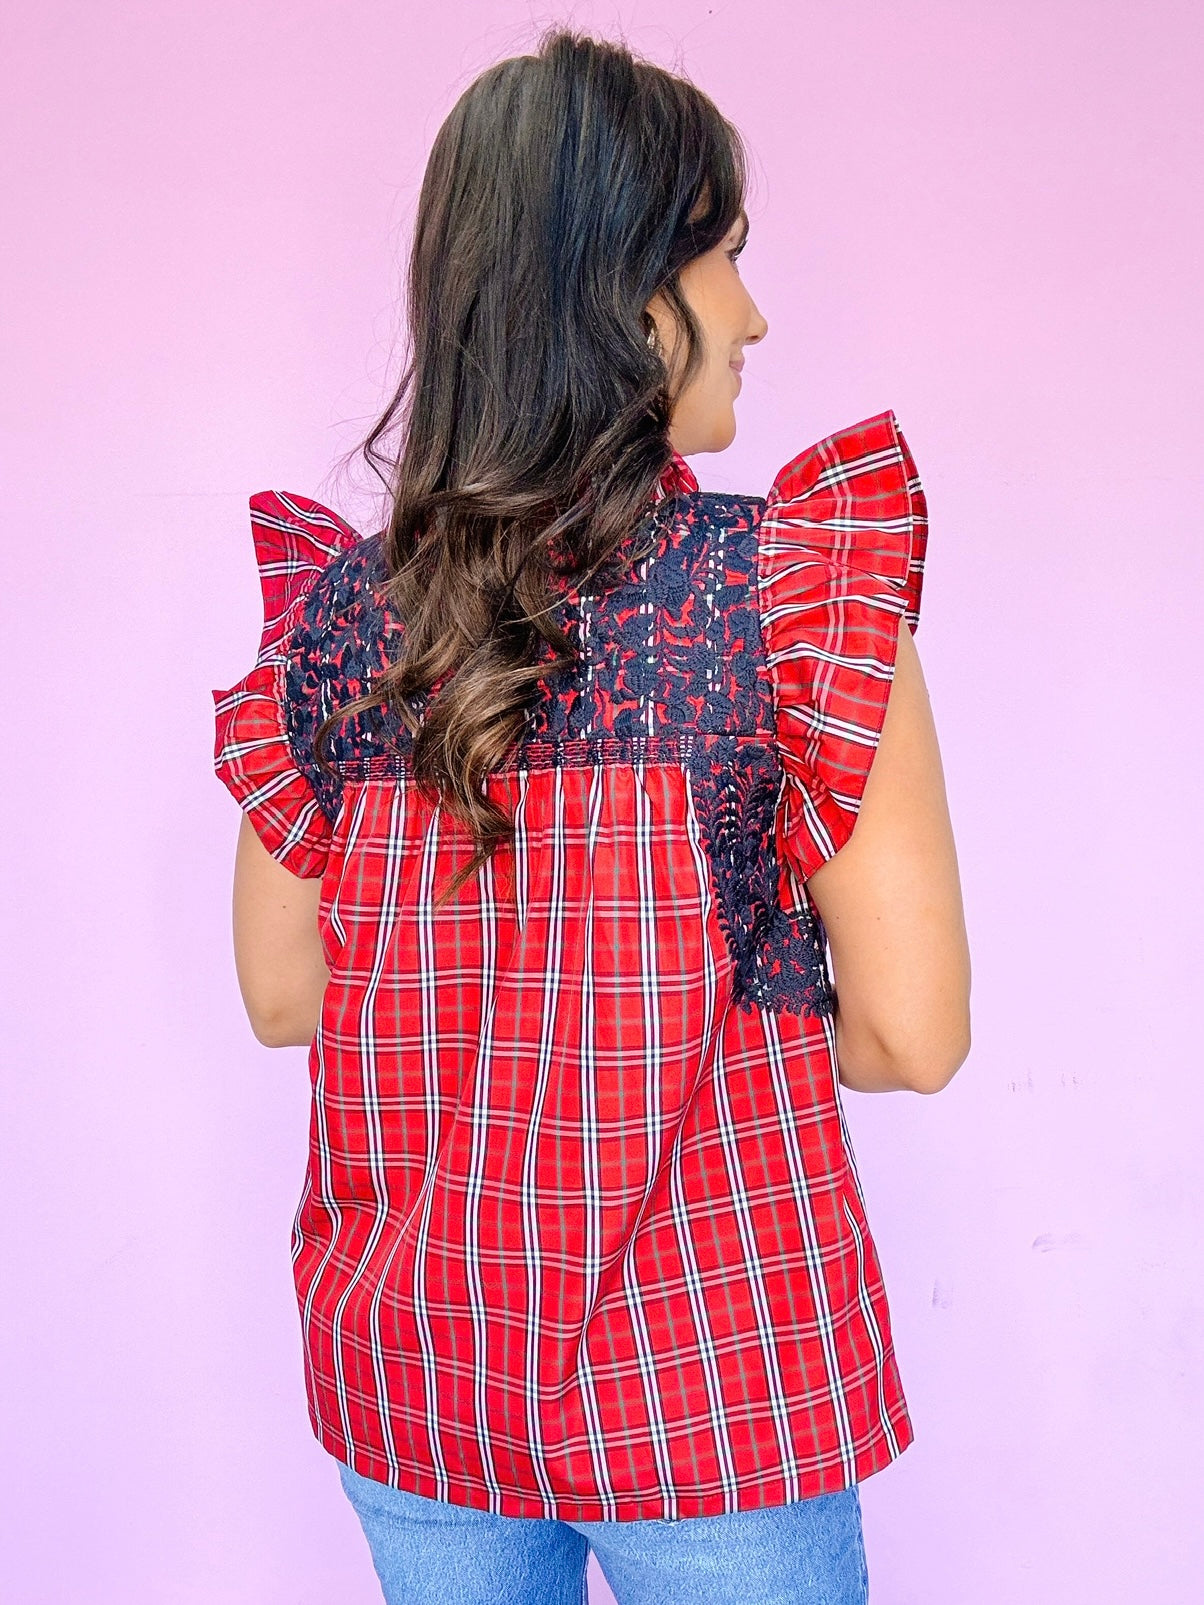 RAYNA RUFFLE GINGHAM EMBROIDERED TOP - RED